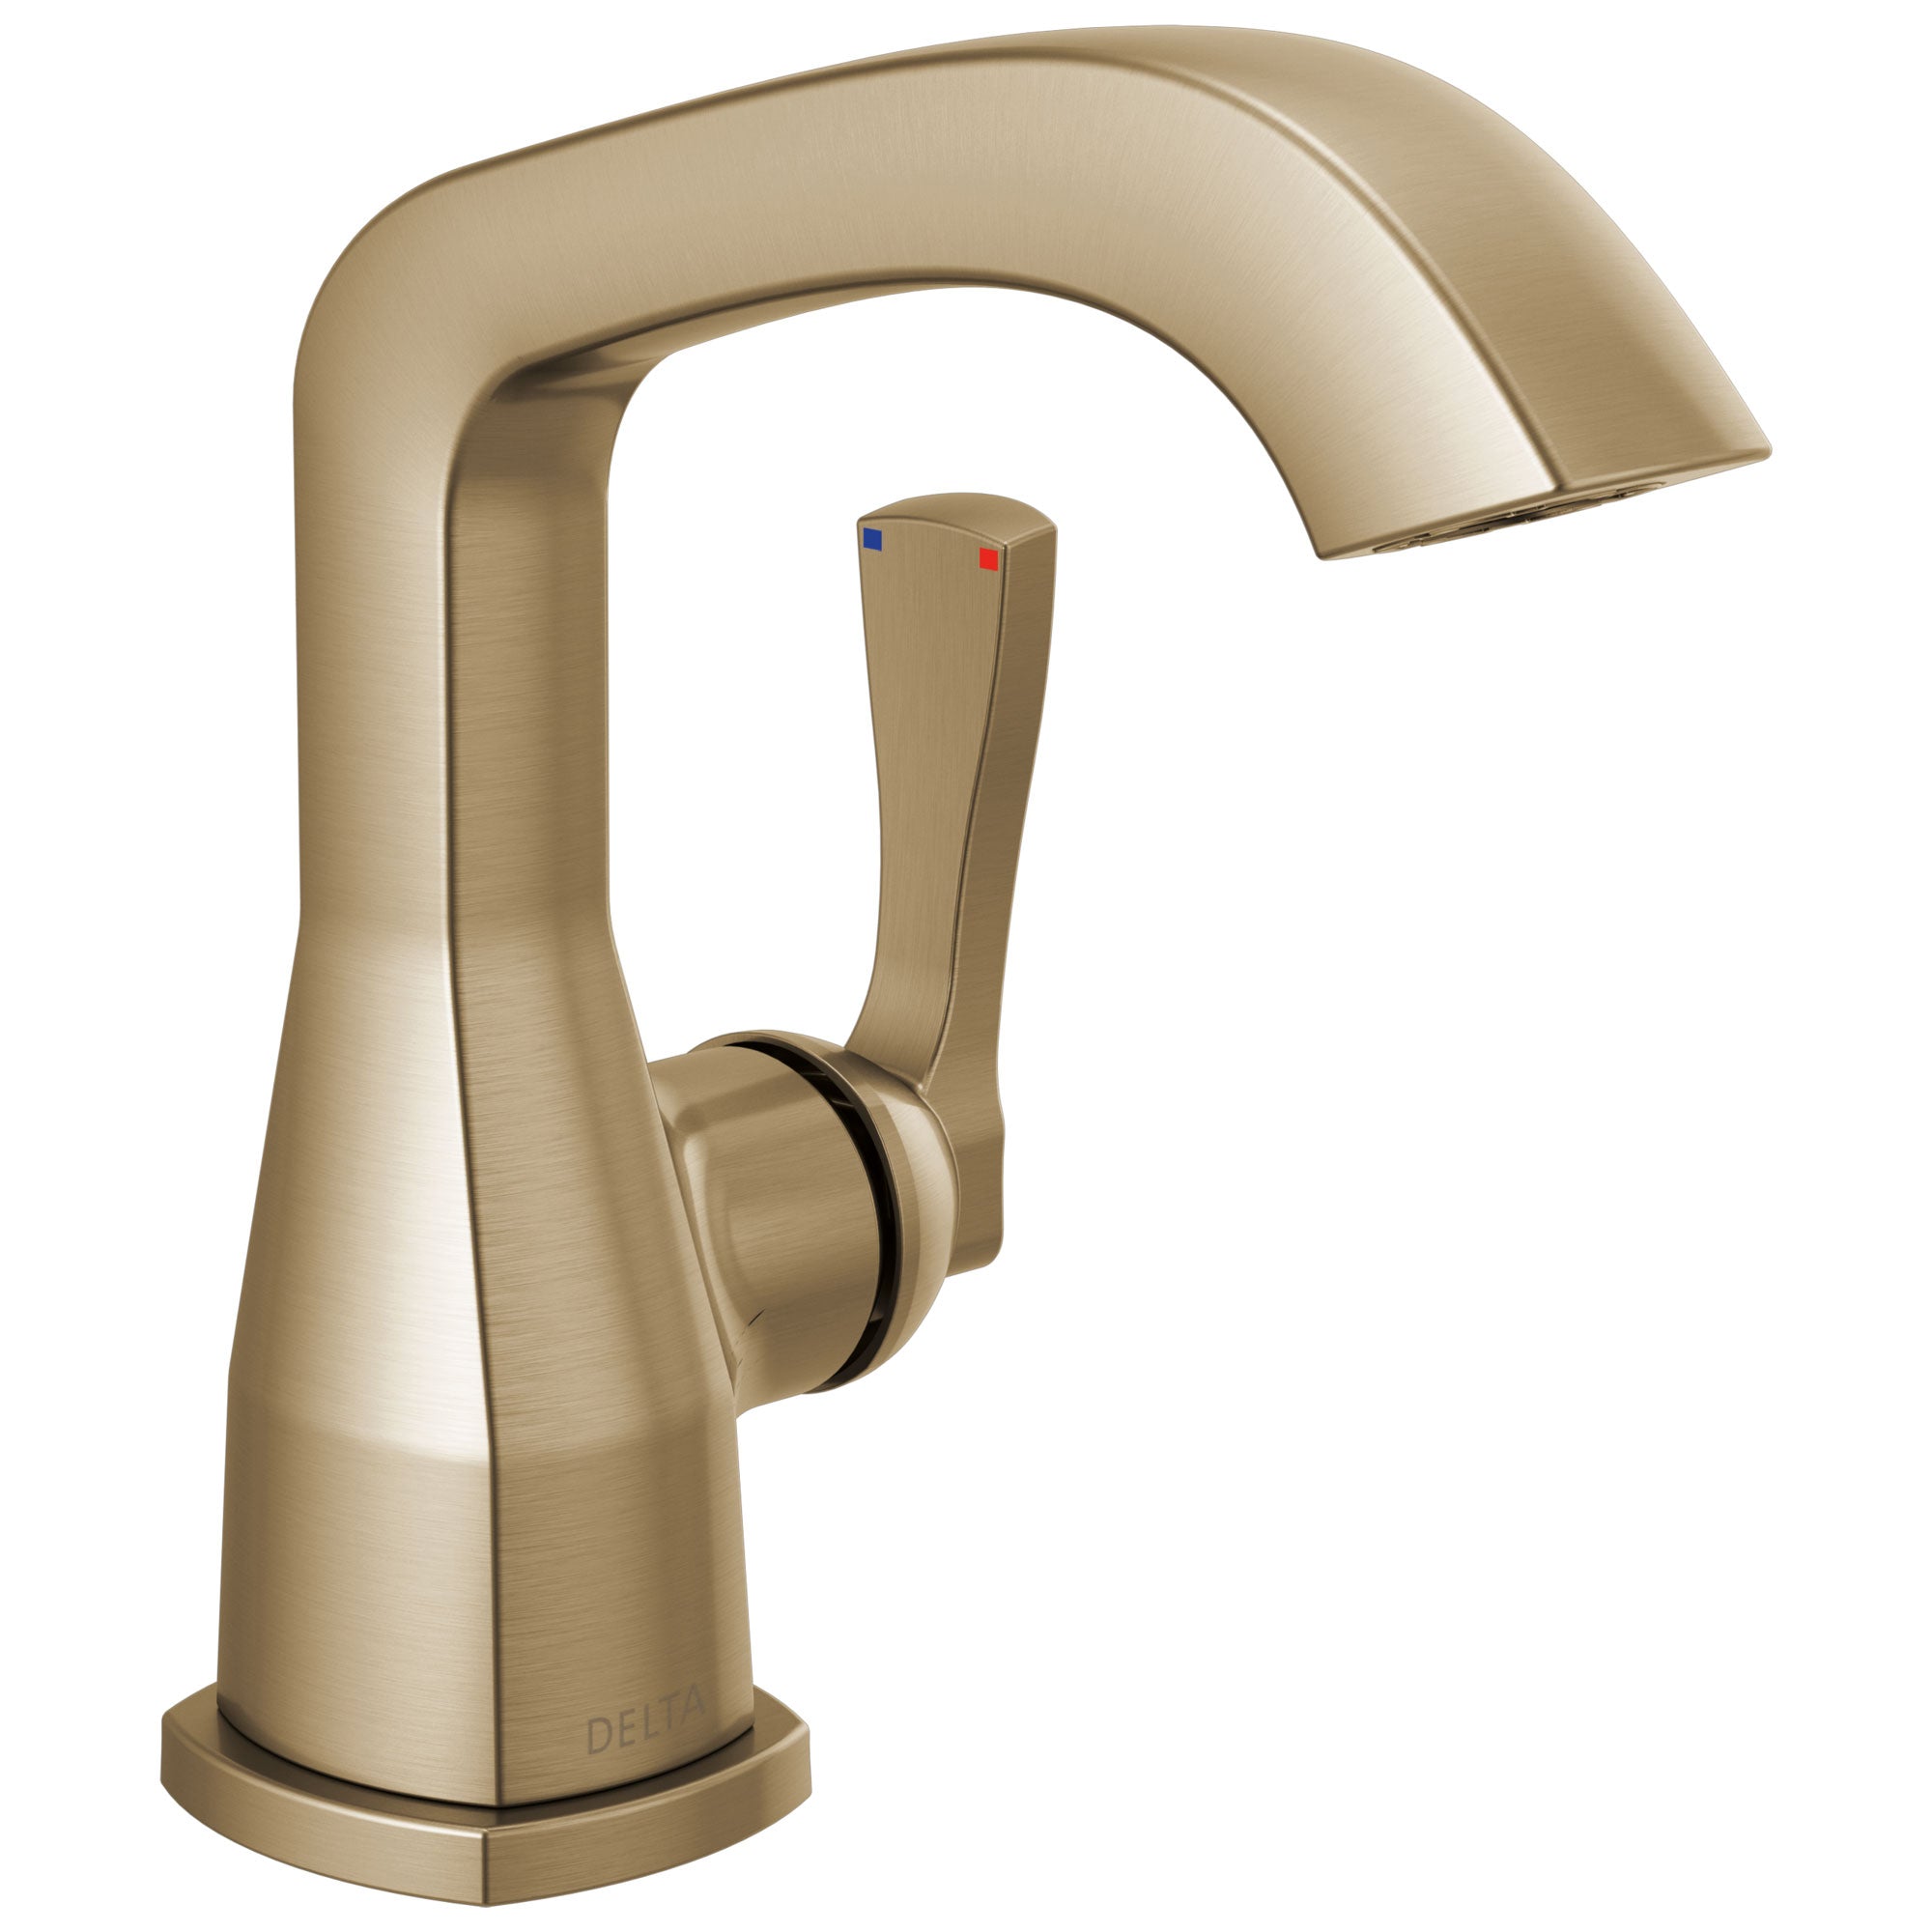 Delta Stryke Champagne Bronze Finish Single Hole Bathroom Sink Faucet Includes Lever Handle and Matching Drain D3601V